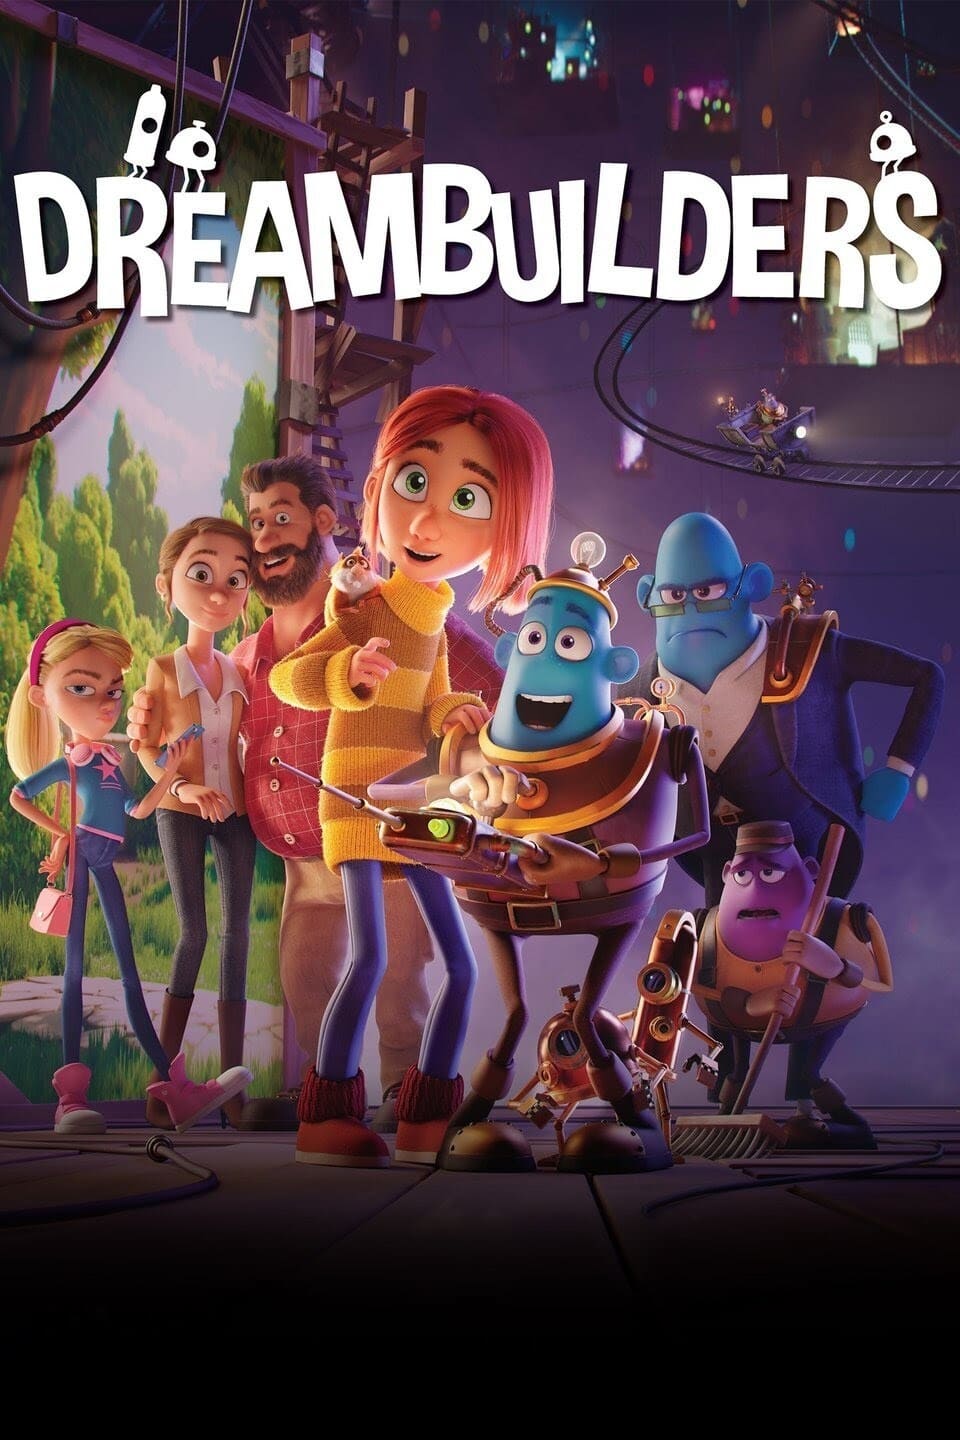 Poster for the movie "Dreambuilders"